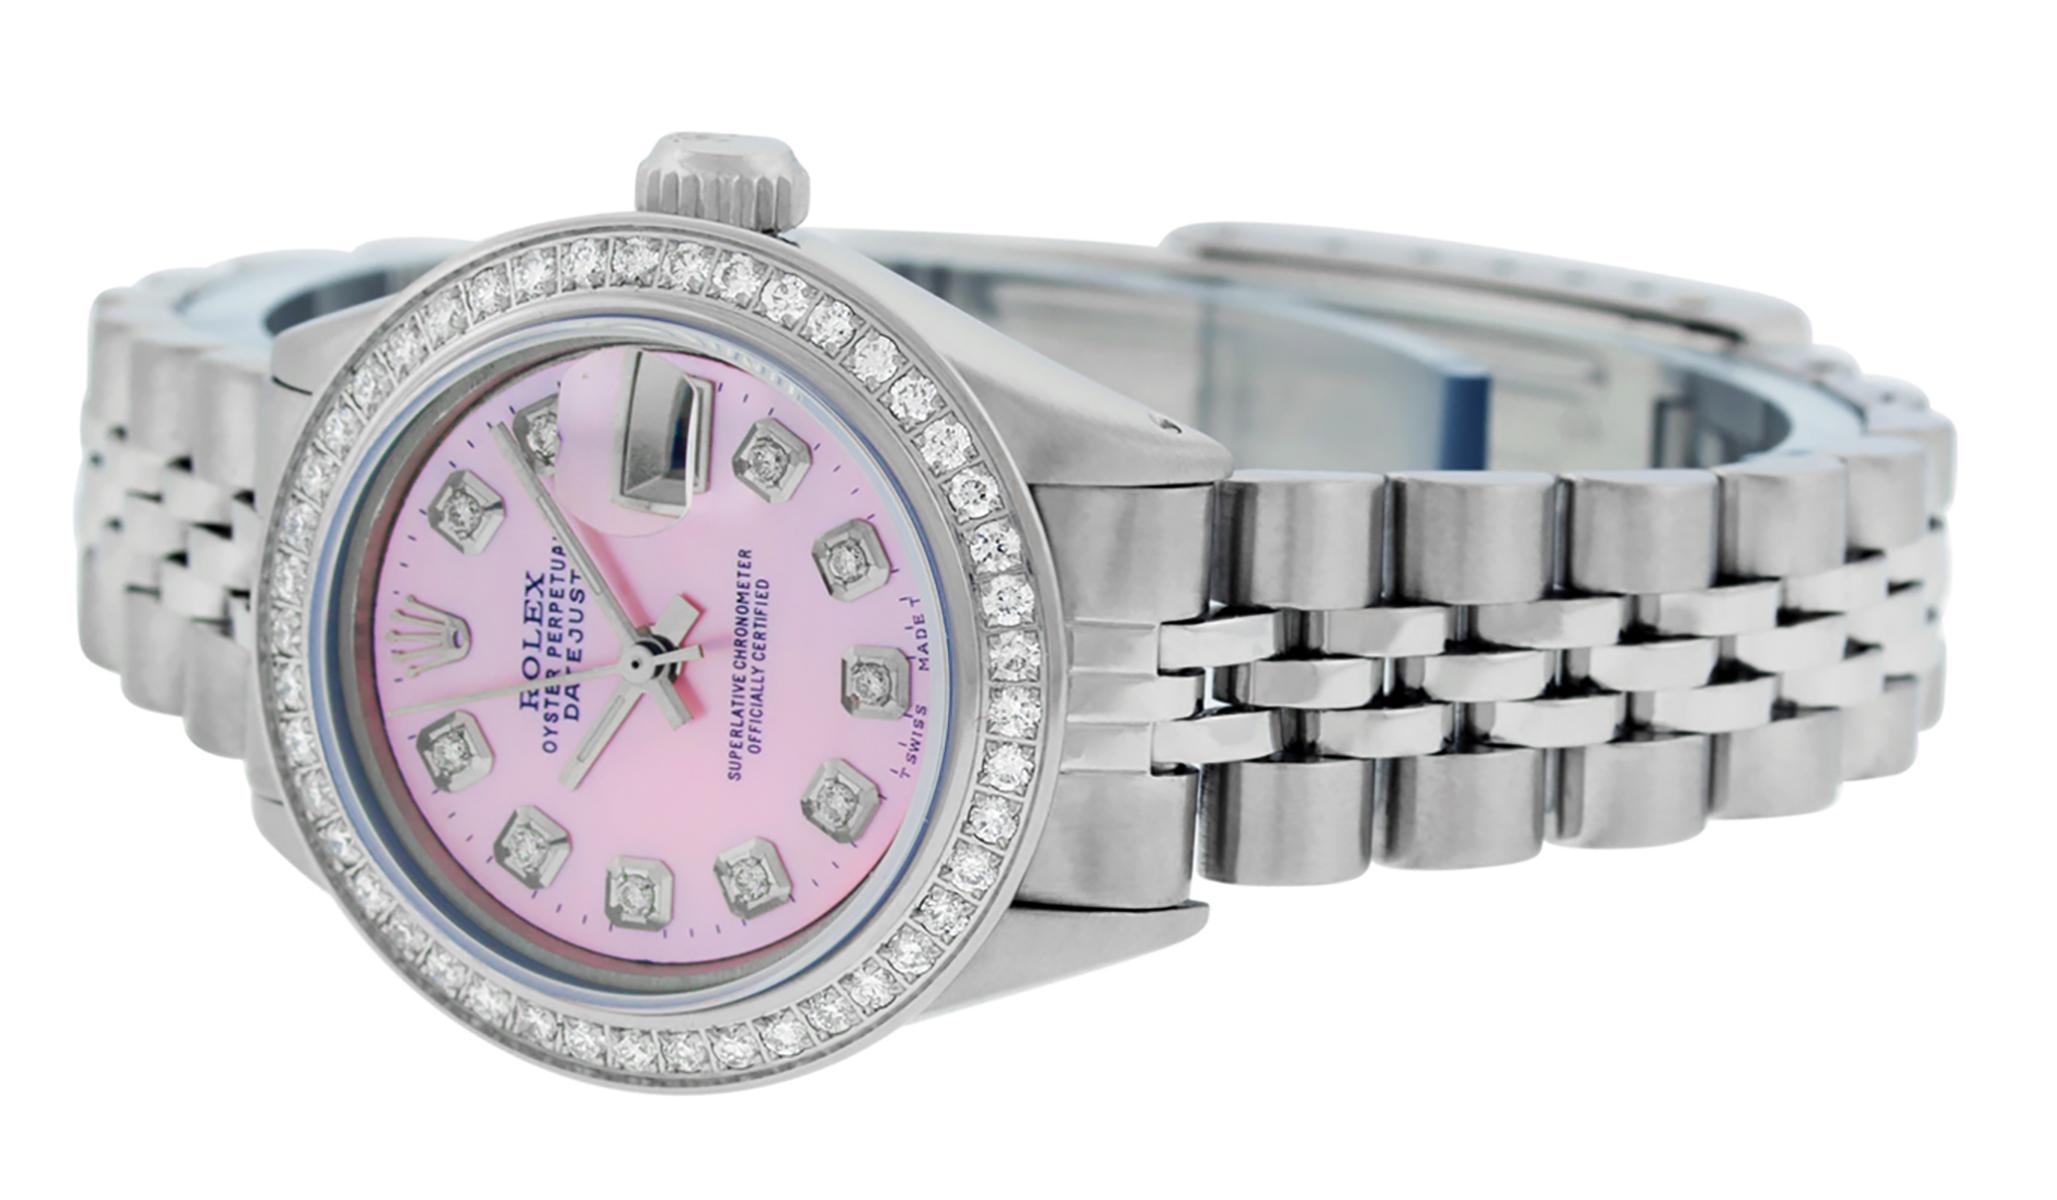 Rolex Women's Datejust Watch Stainless Steel Pink Mother of Pearl Diamond Dial 2